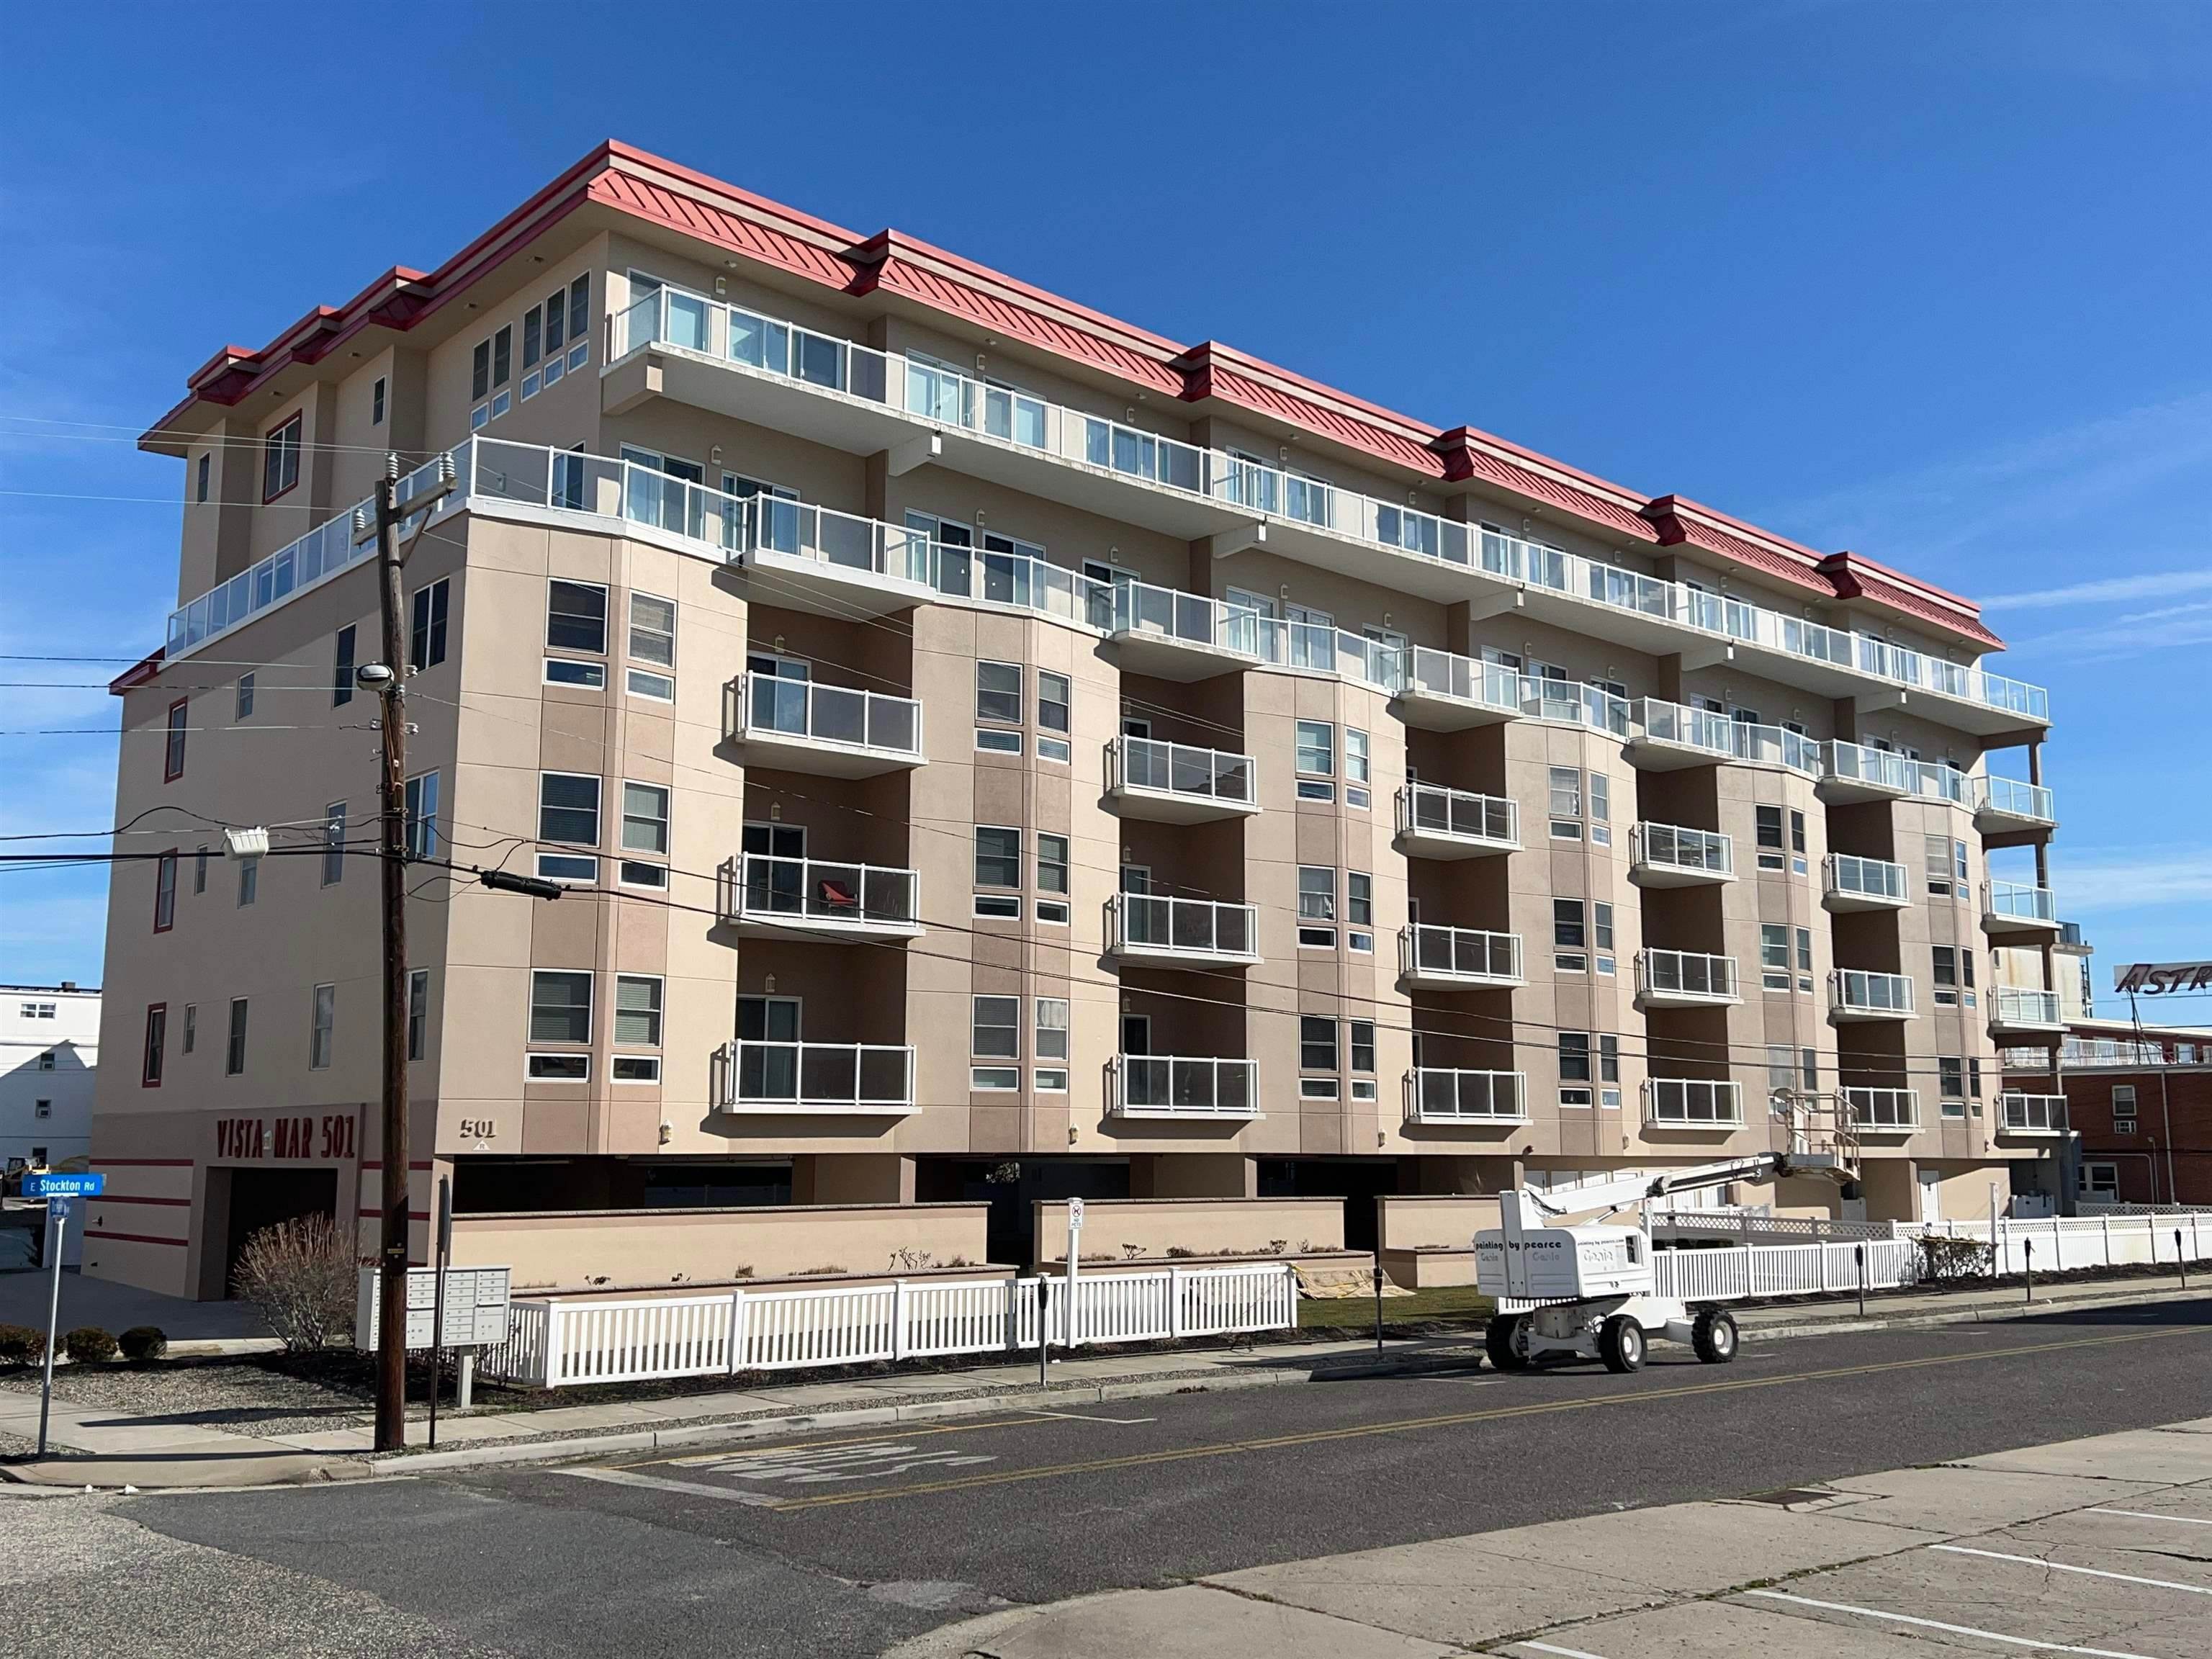 Condominiums for Sale at 501 E Stockton Road Wildwood Crest, New Jersey 08260 United States